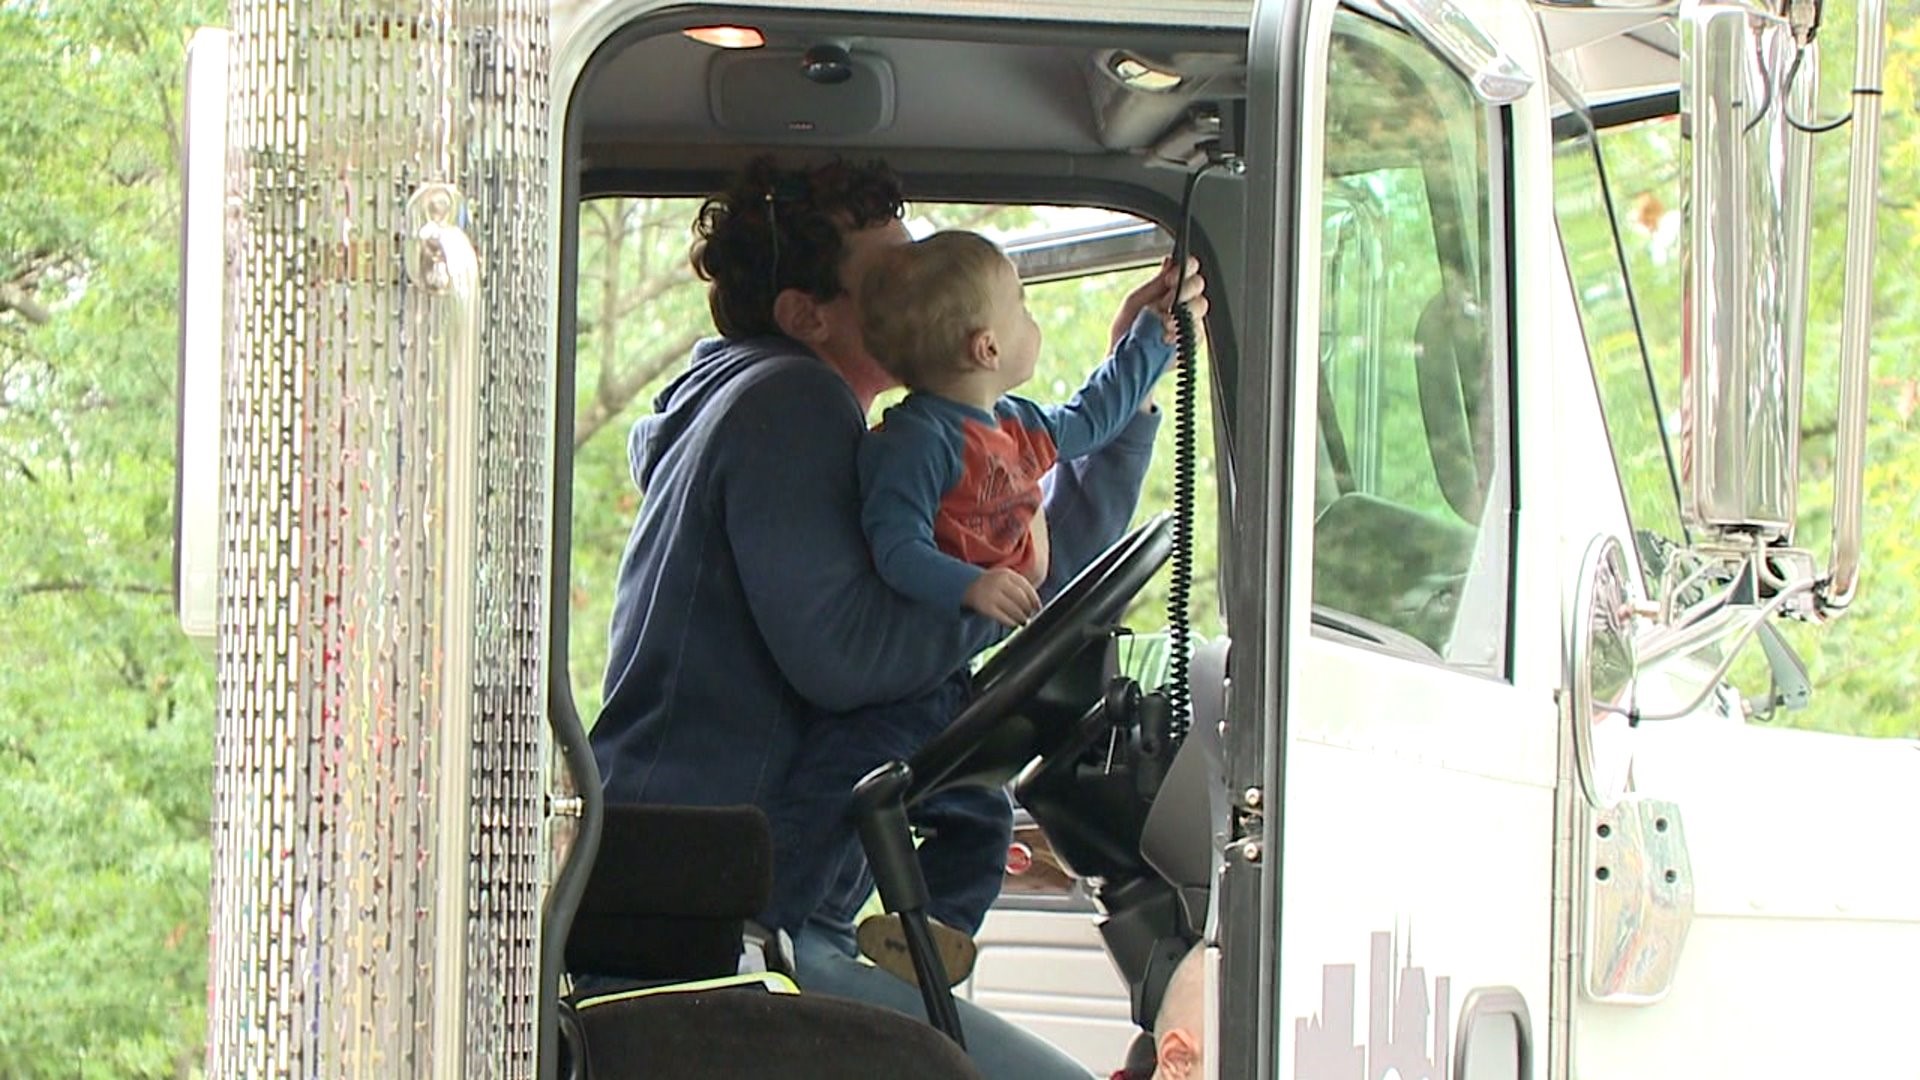 Kids Delight at Annual Touch a Truck Event in Scranton